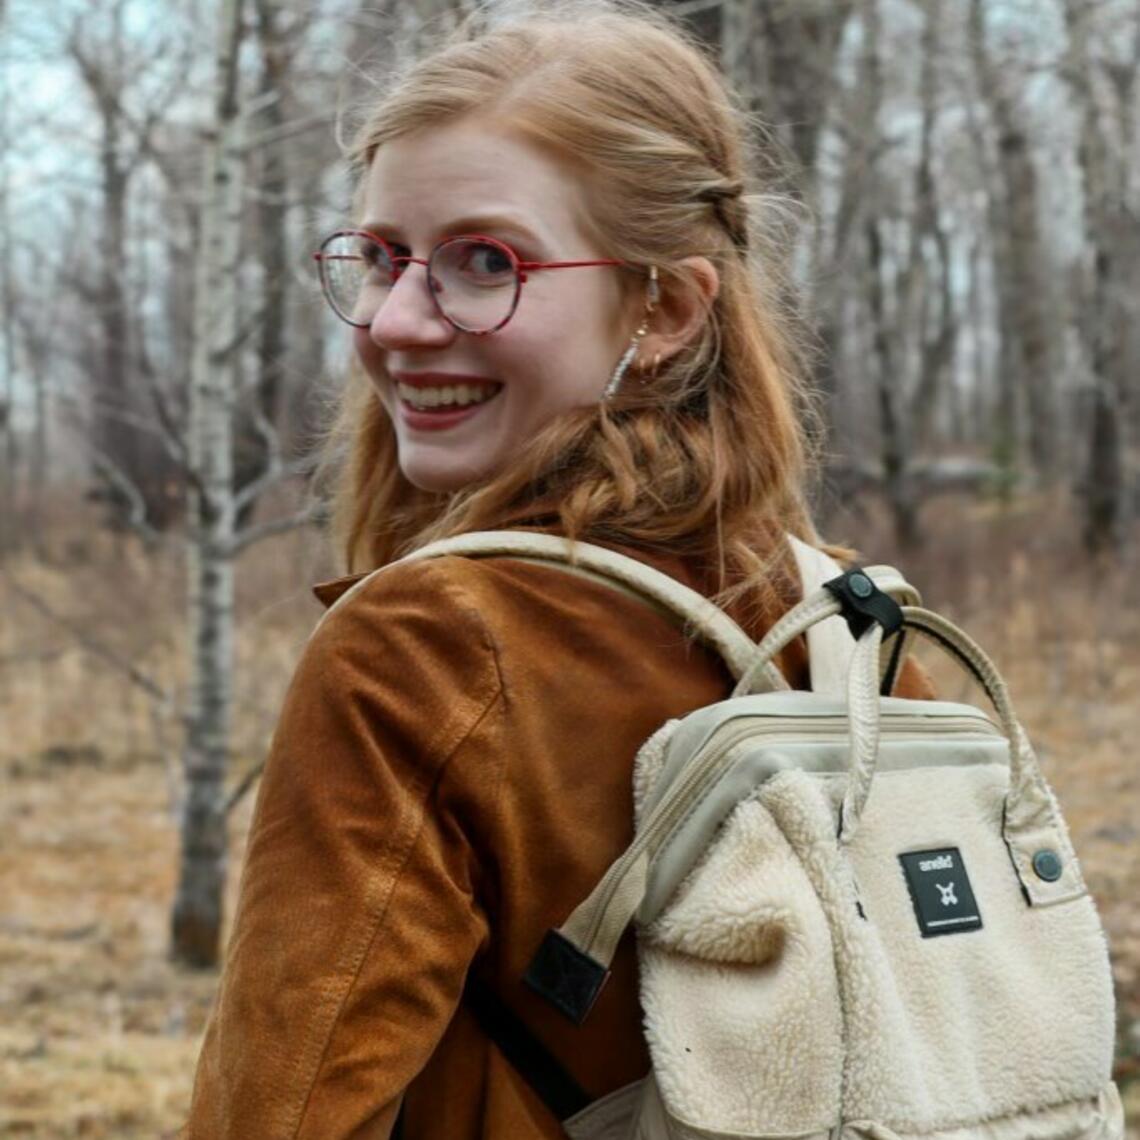 Jess Churcher stands in a forest wearing a backpack and a brown coat and smiles back at the camera